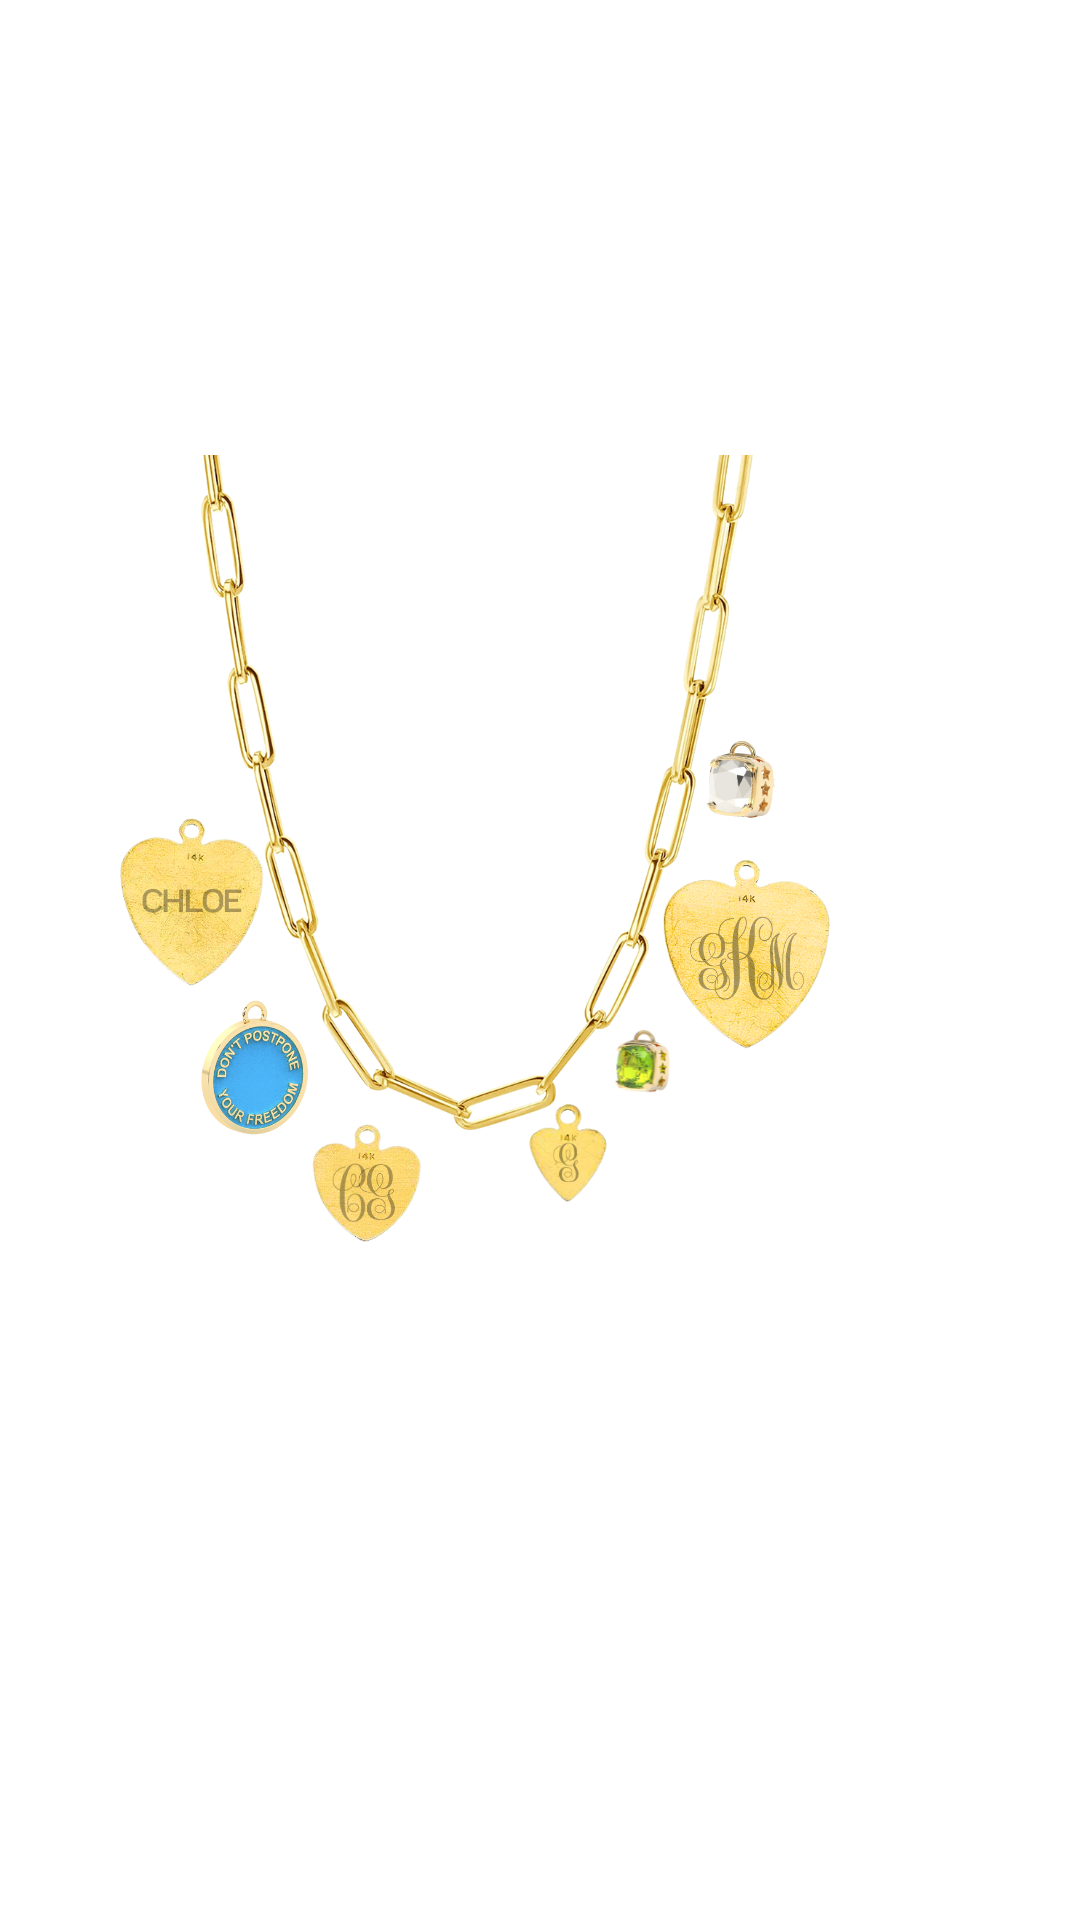 Whole Heart Fitzgerald Charm (4 Sizes)